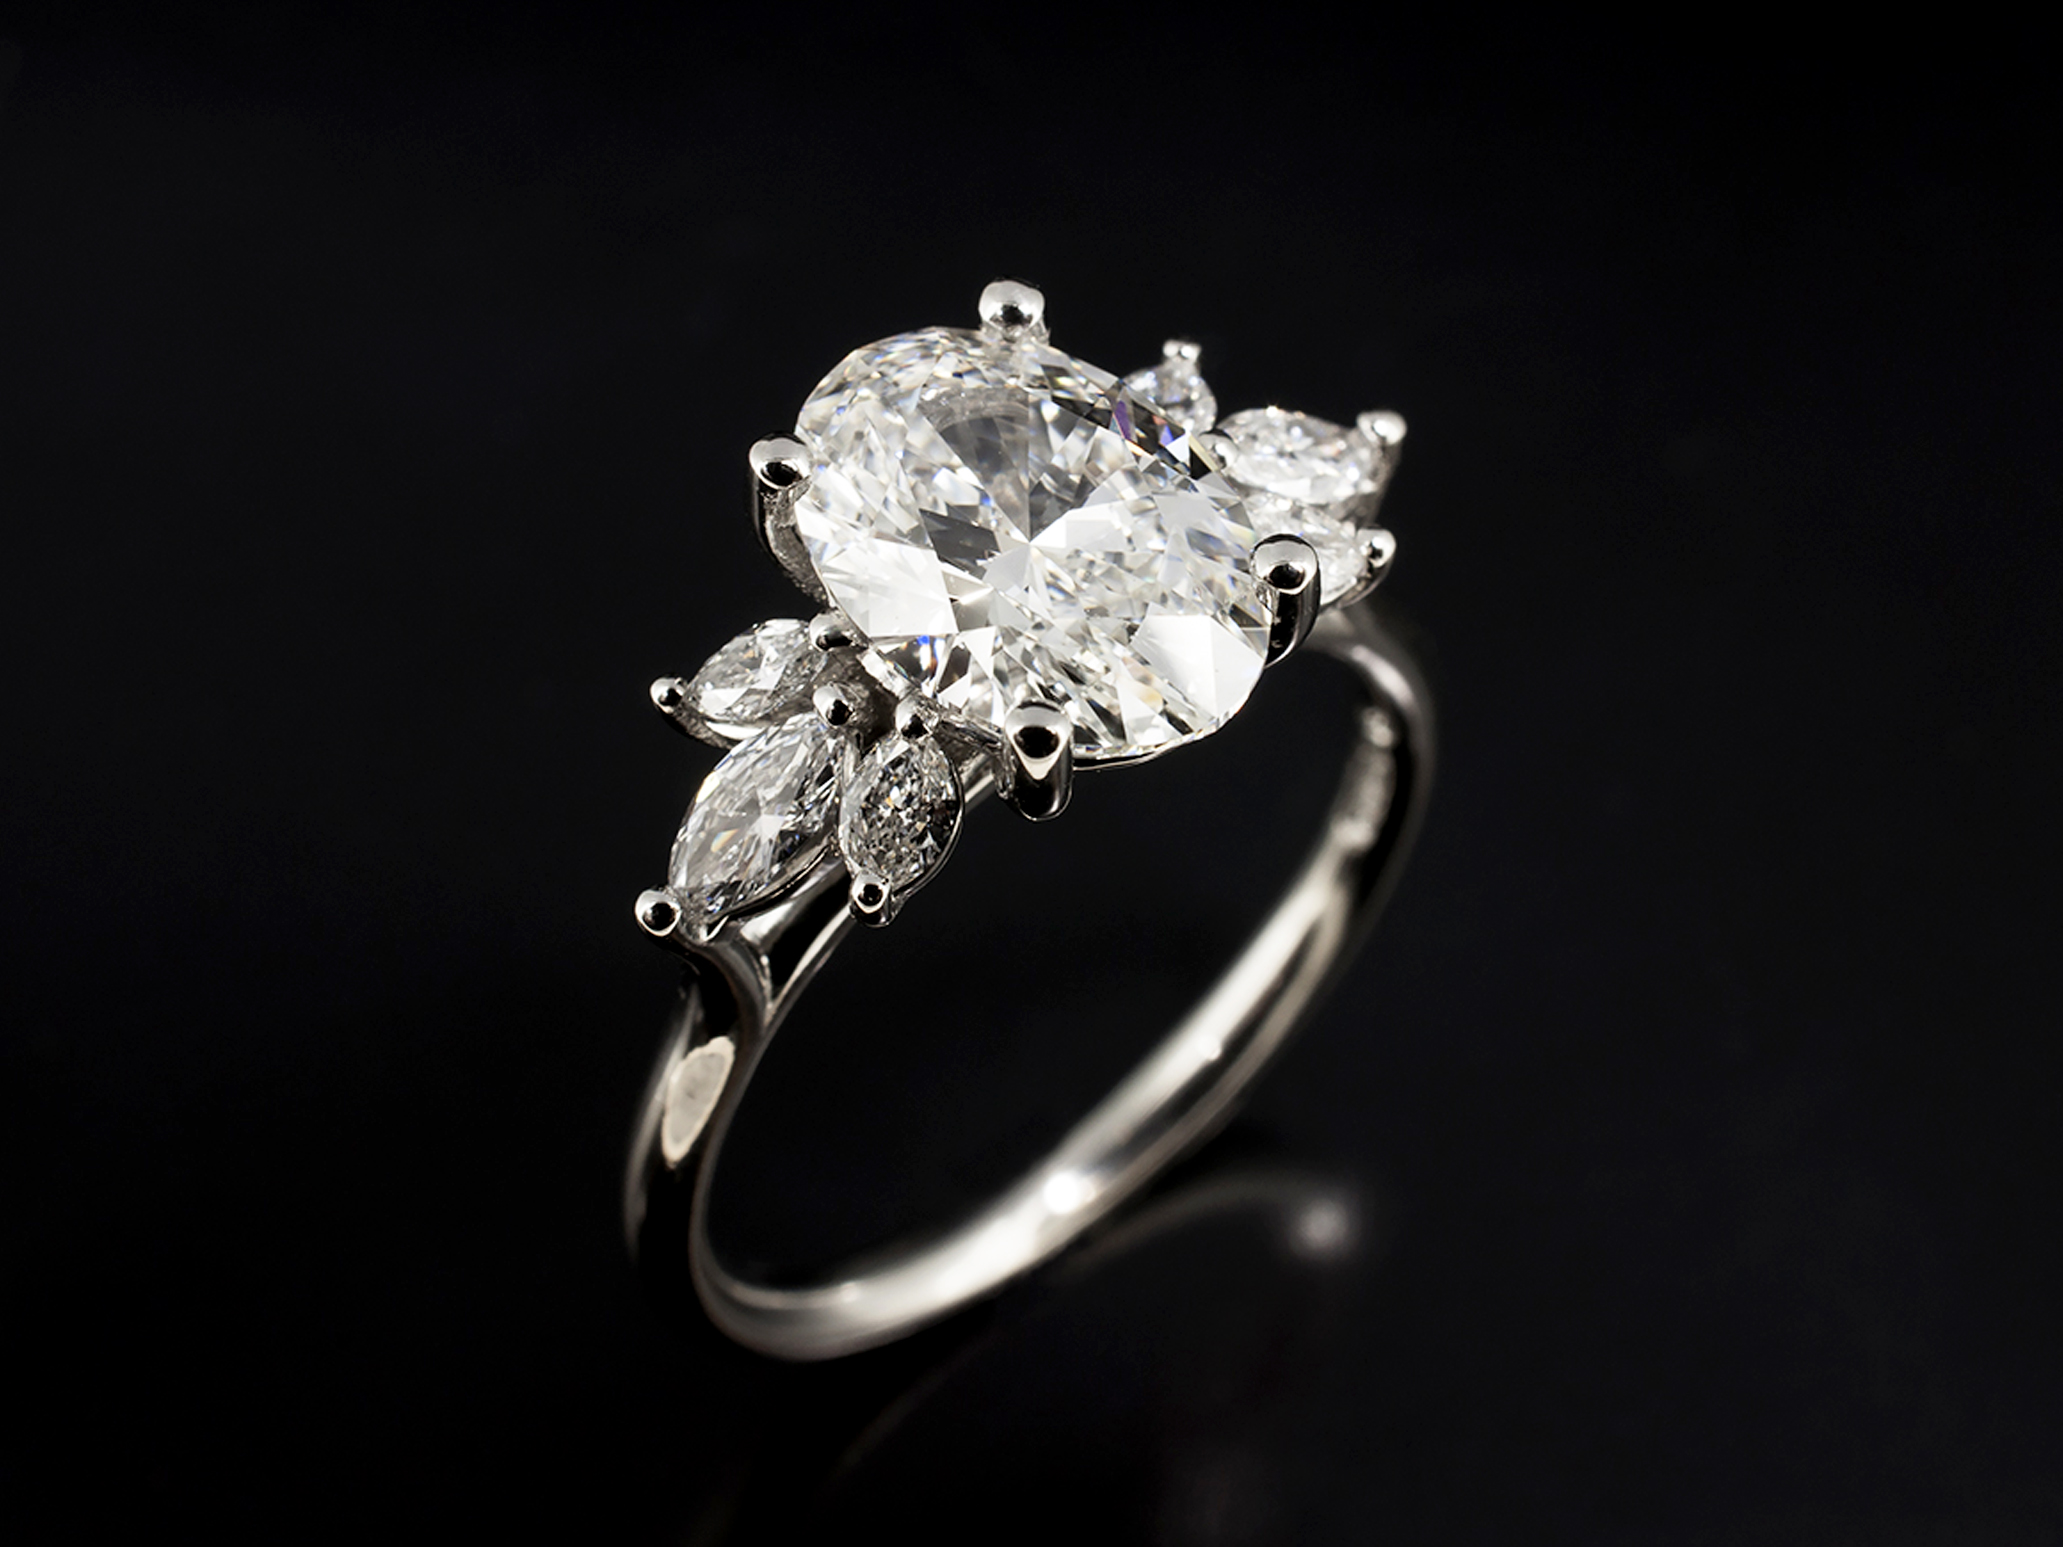 bespoke oval cut Lab Grown diamond engagement ring by Blair and Sheridan